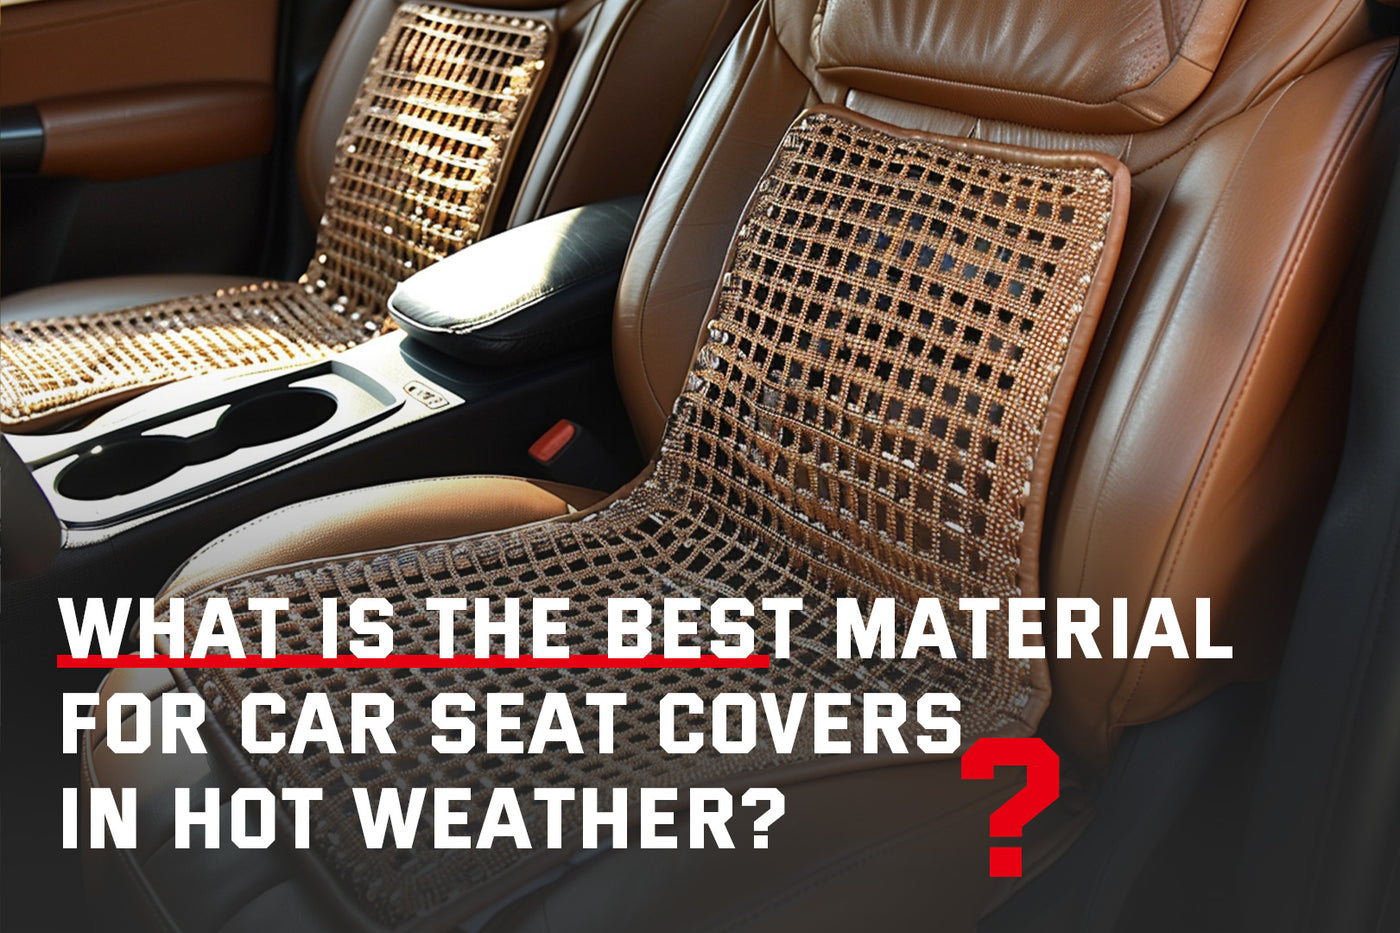 Summer Seat Covers For Cars